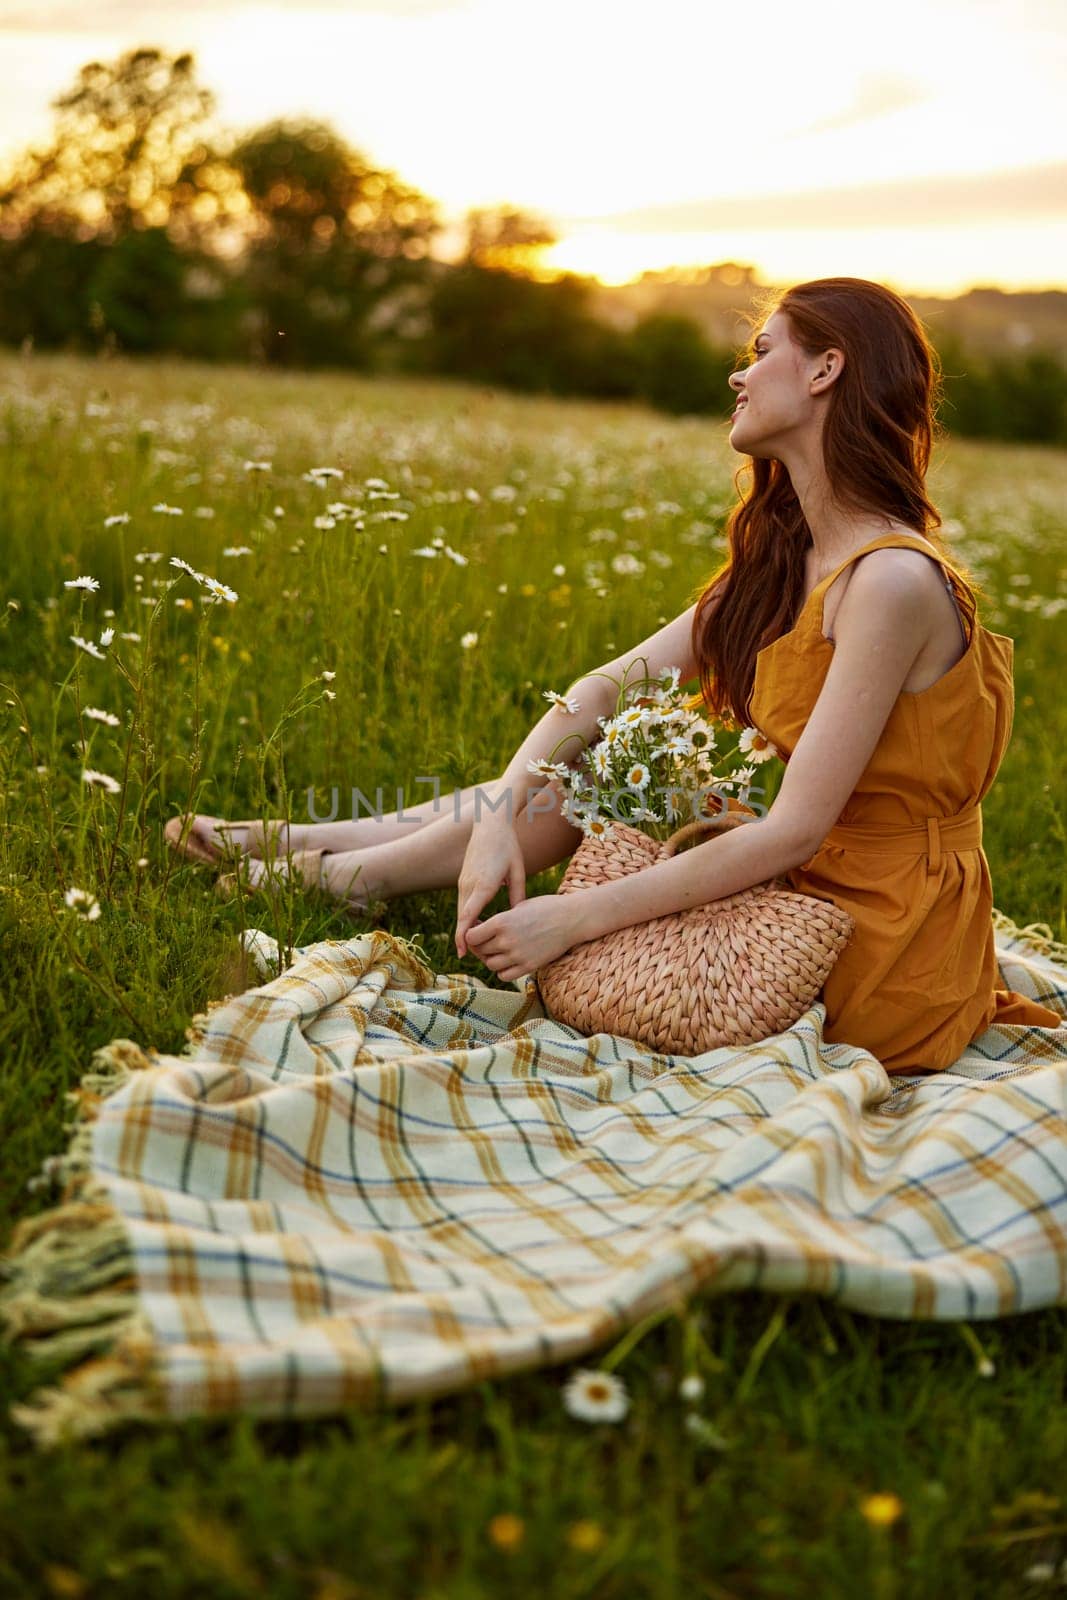 happy redhead woman sits in a field of daisies on a plaid during sunset and enjoys nature. High quality photo